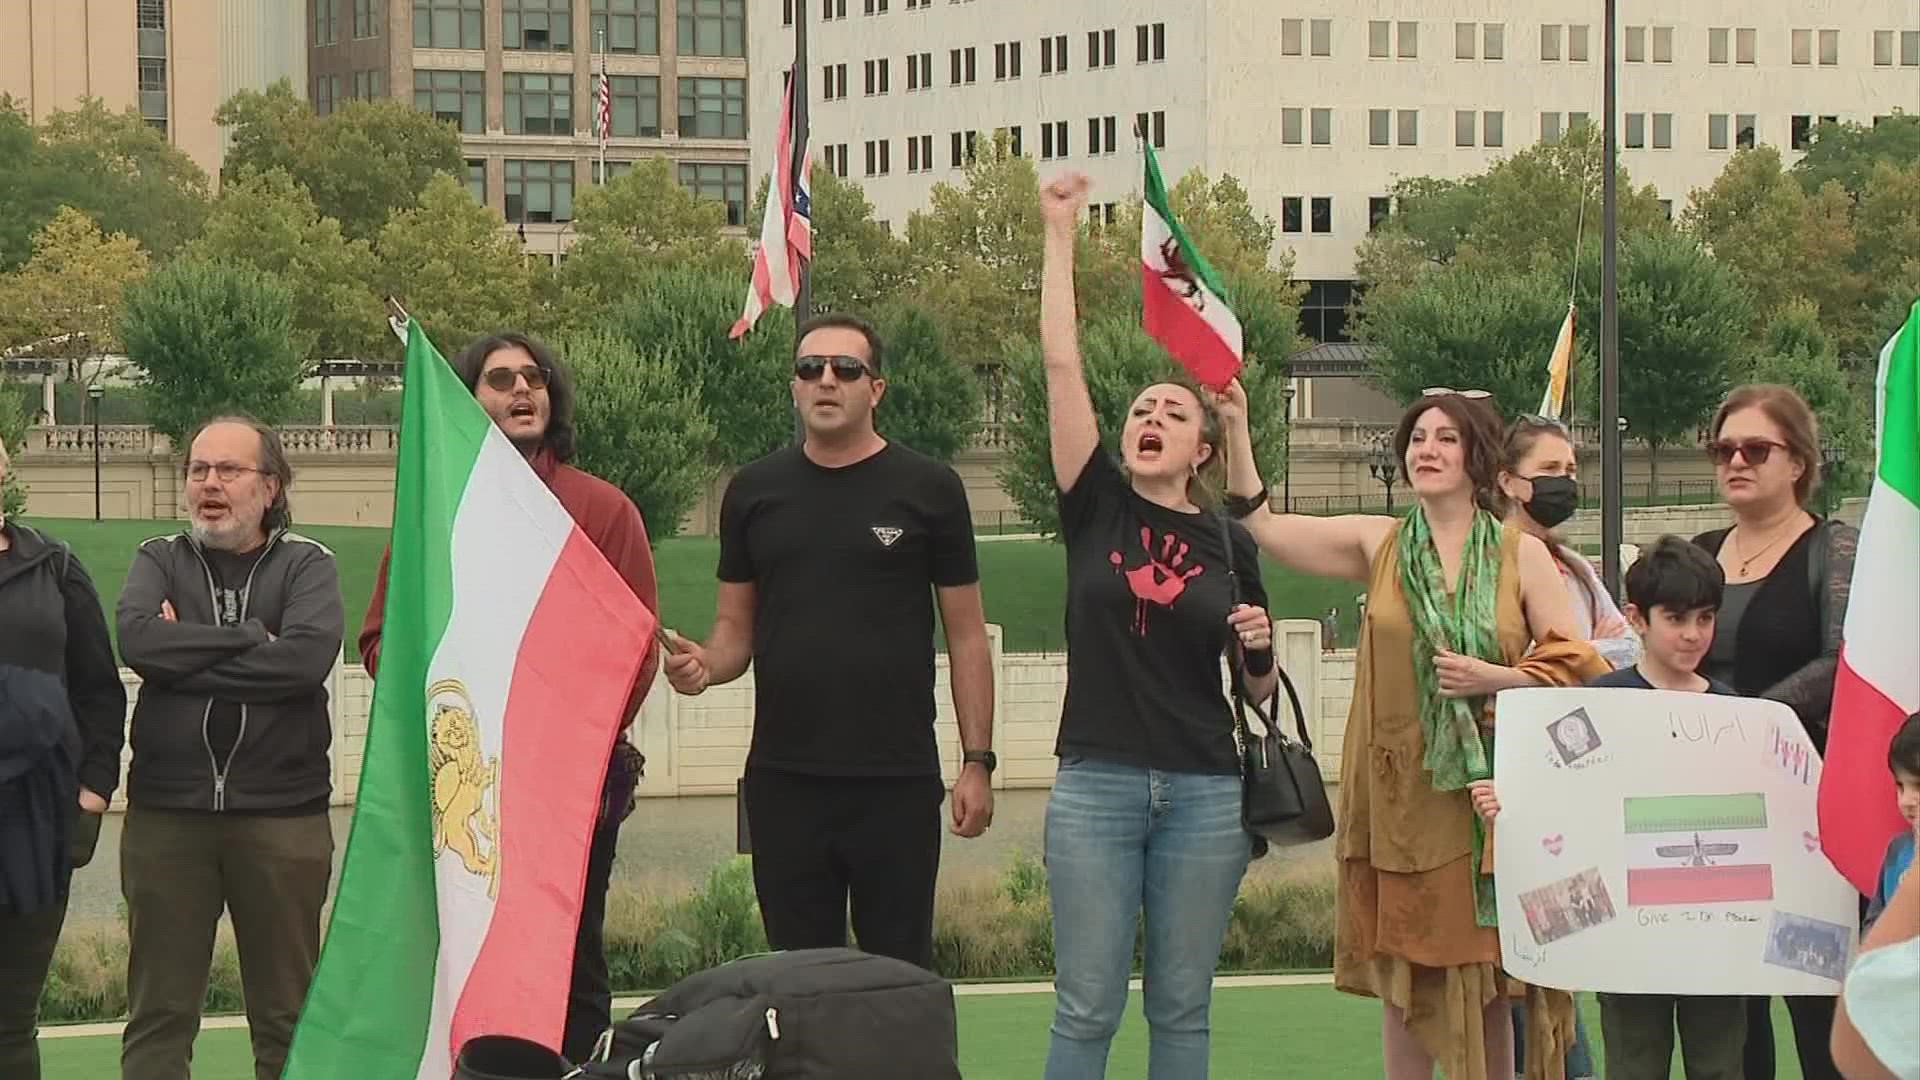 Dozens rallied in downtown Columbus Saturday in response to violence, protests and internet blackouts that have erupted in Iran.